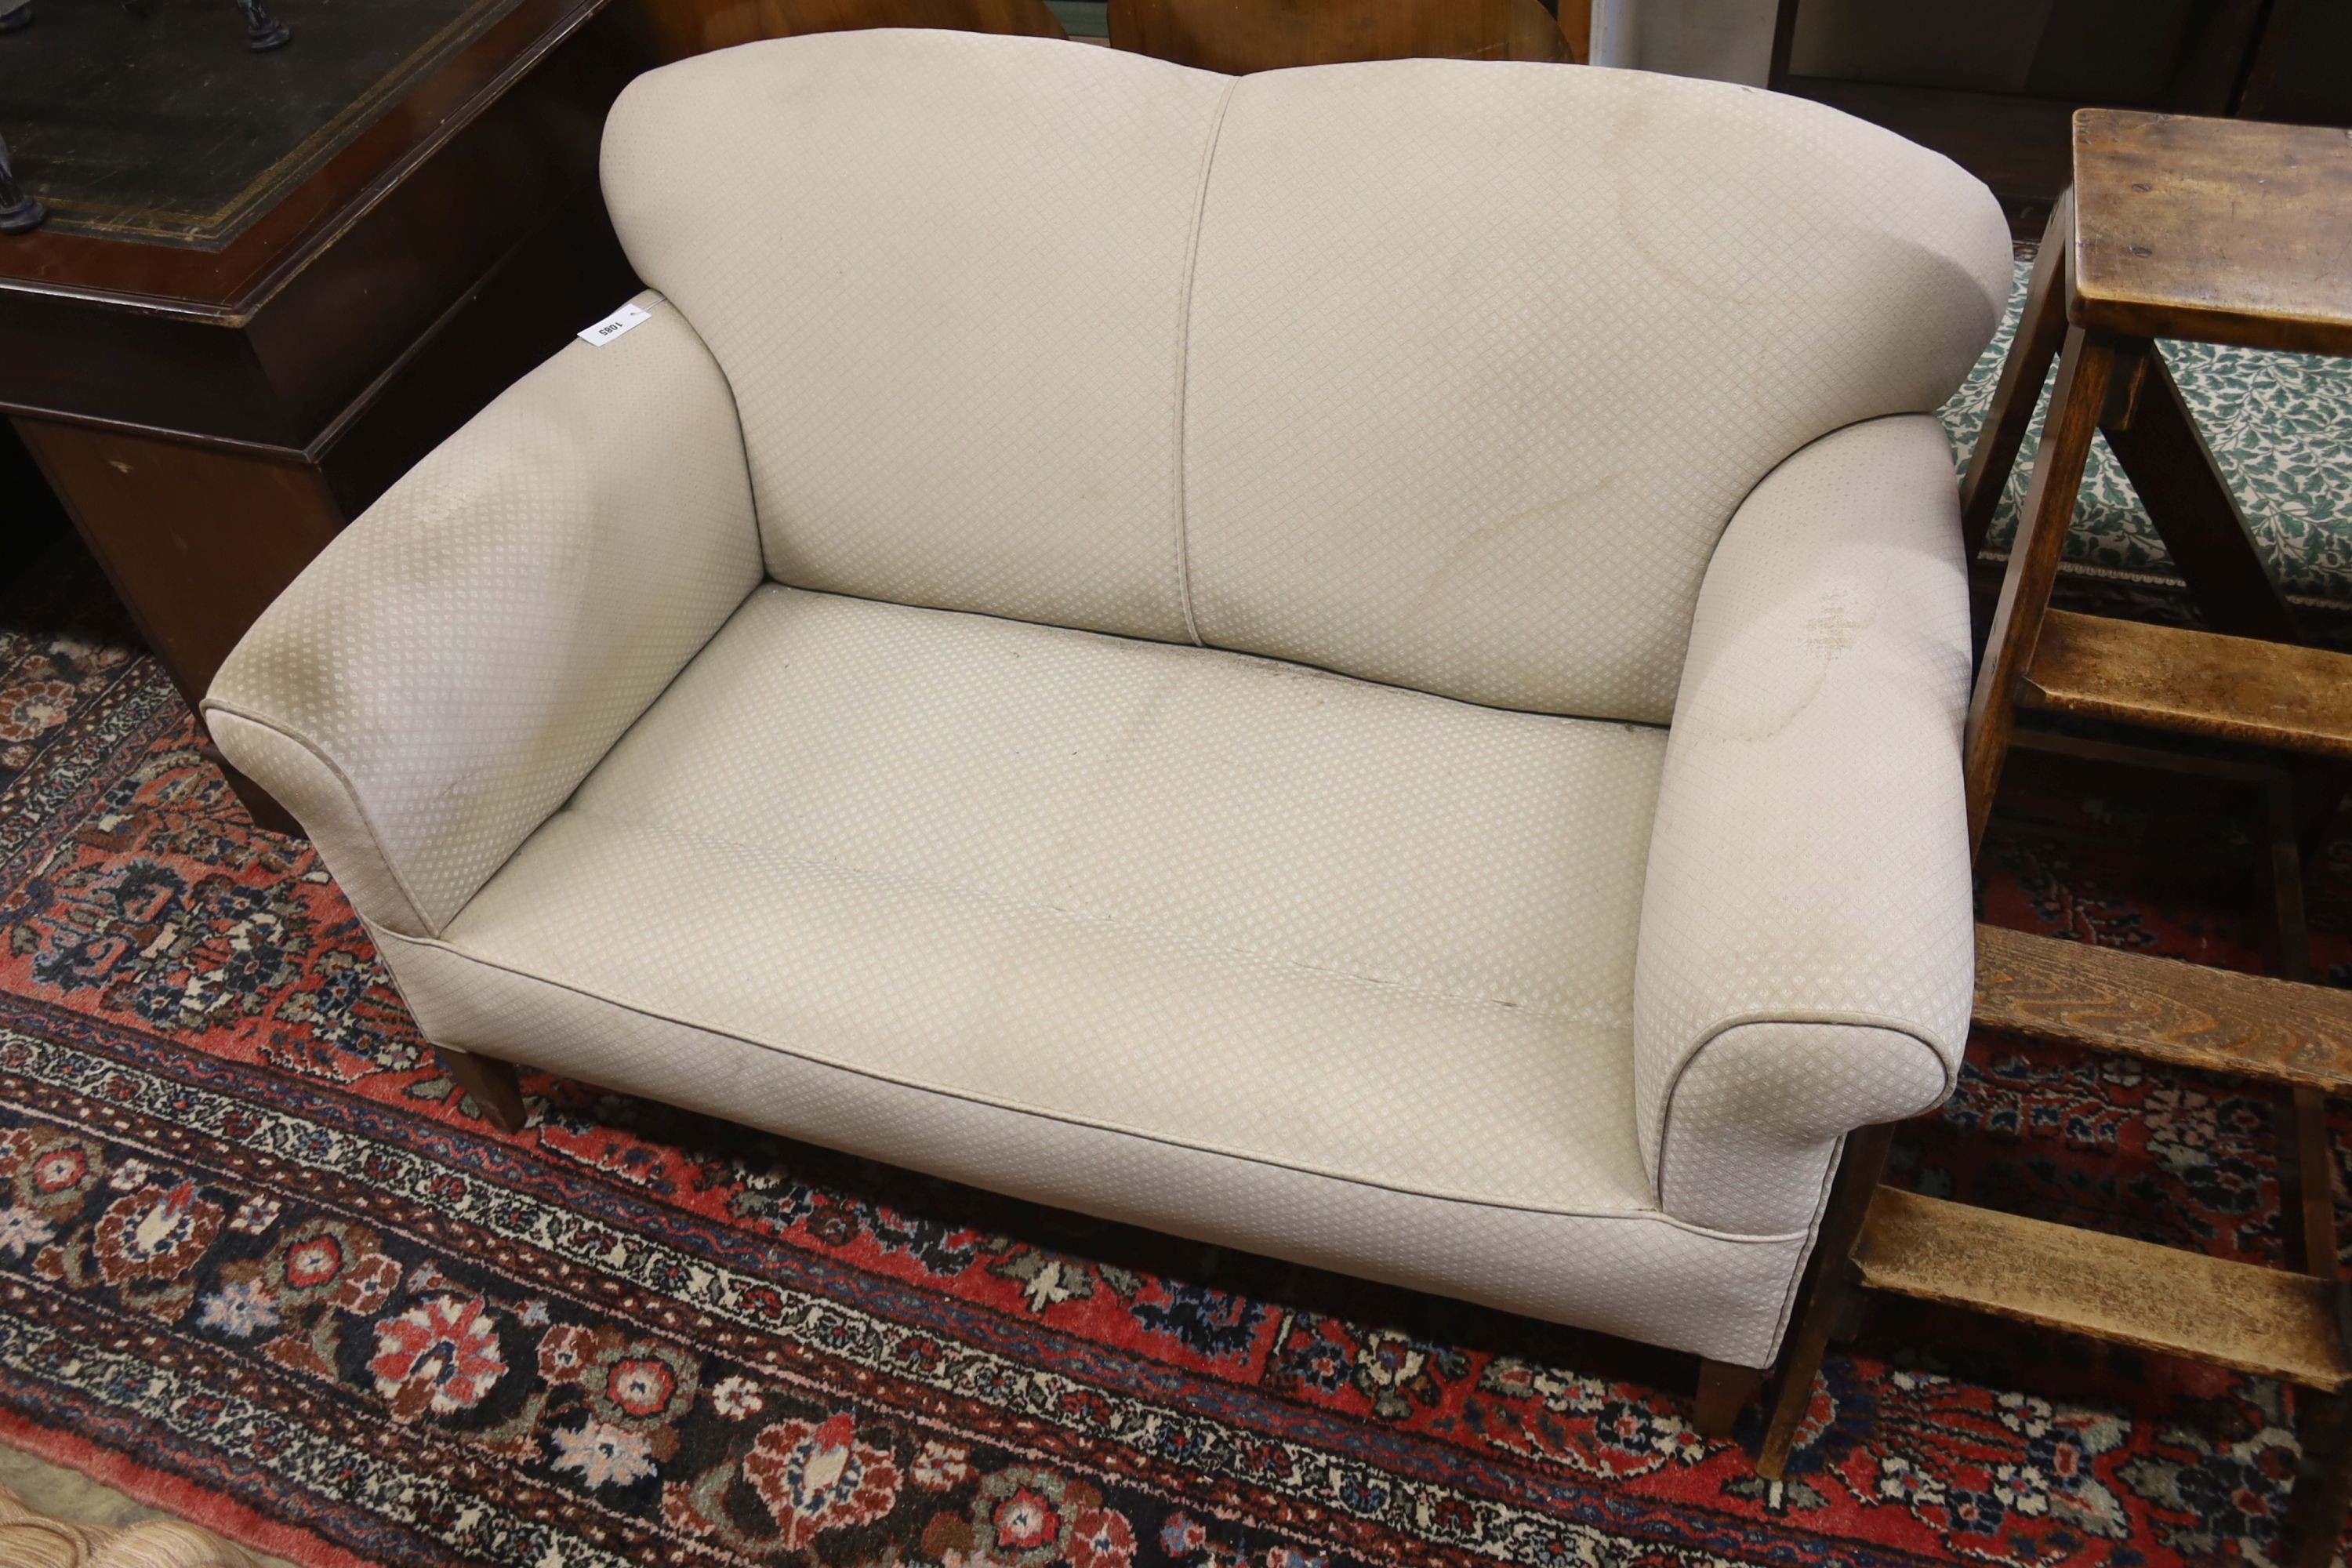 An early 20th century two seater settee, length 130cm, depth 70cm, height 70cm